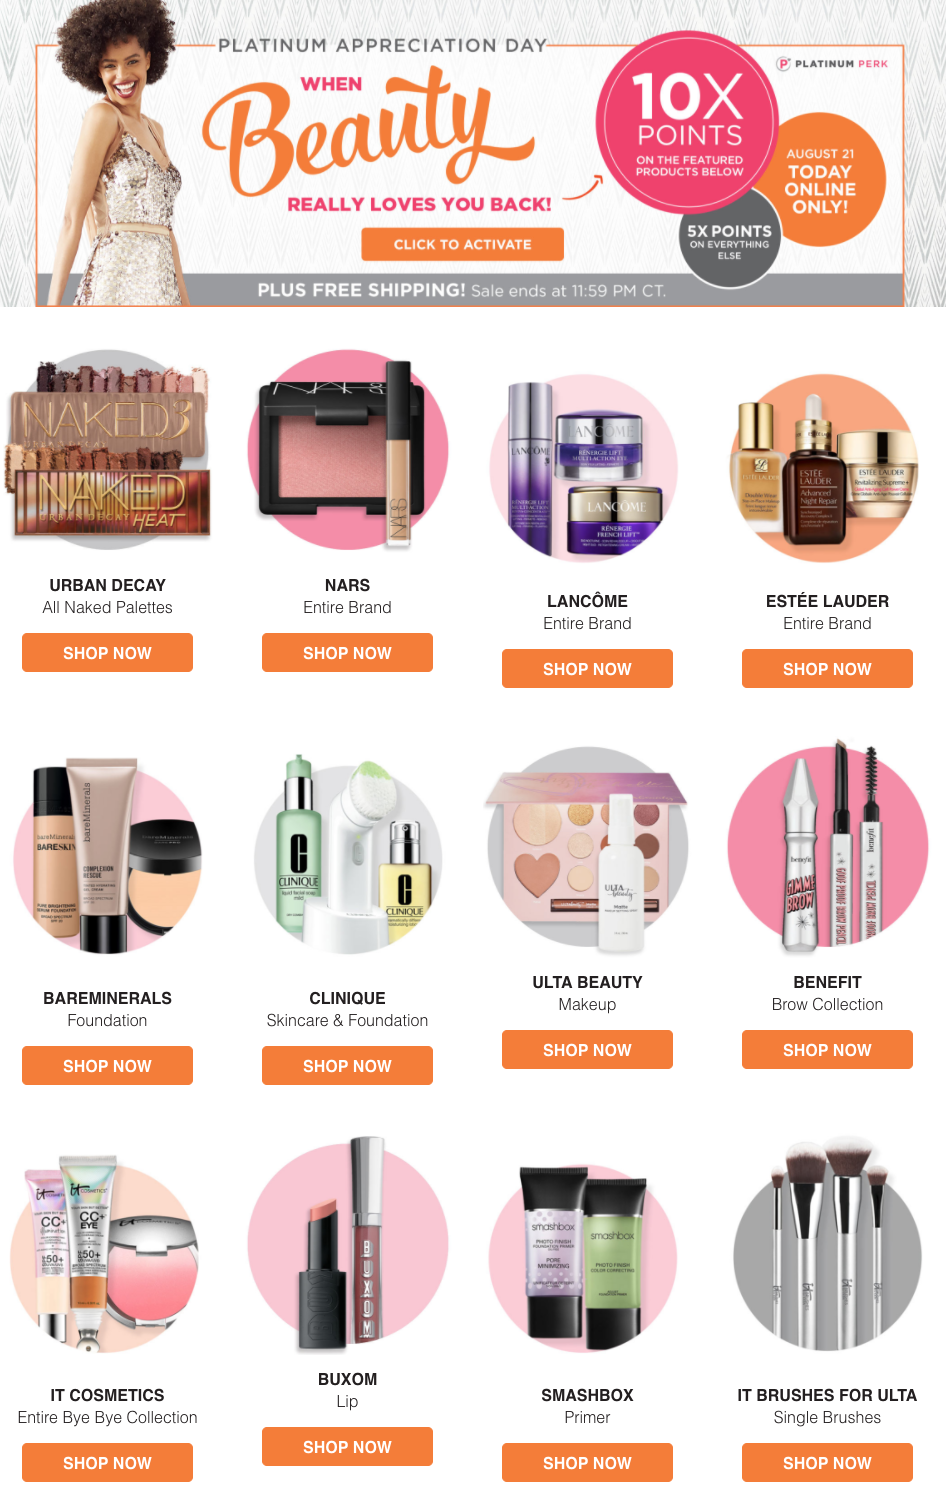 Preview Ulta Platinum 10x points event Gift With Purchase